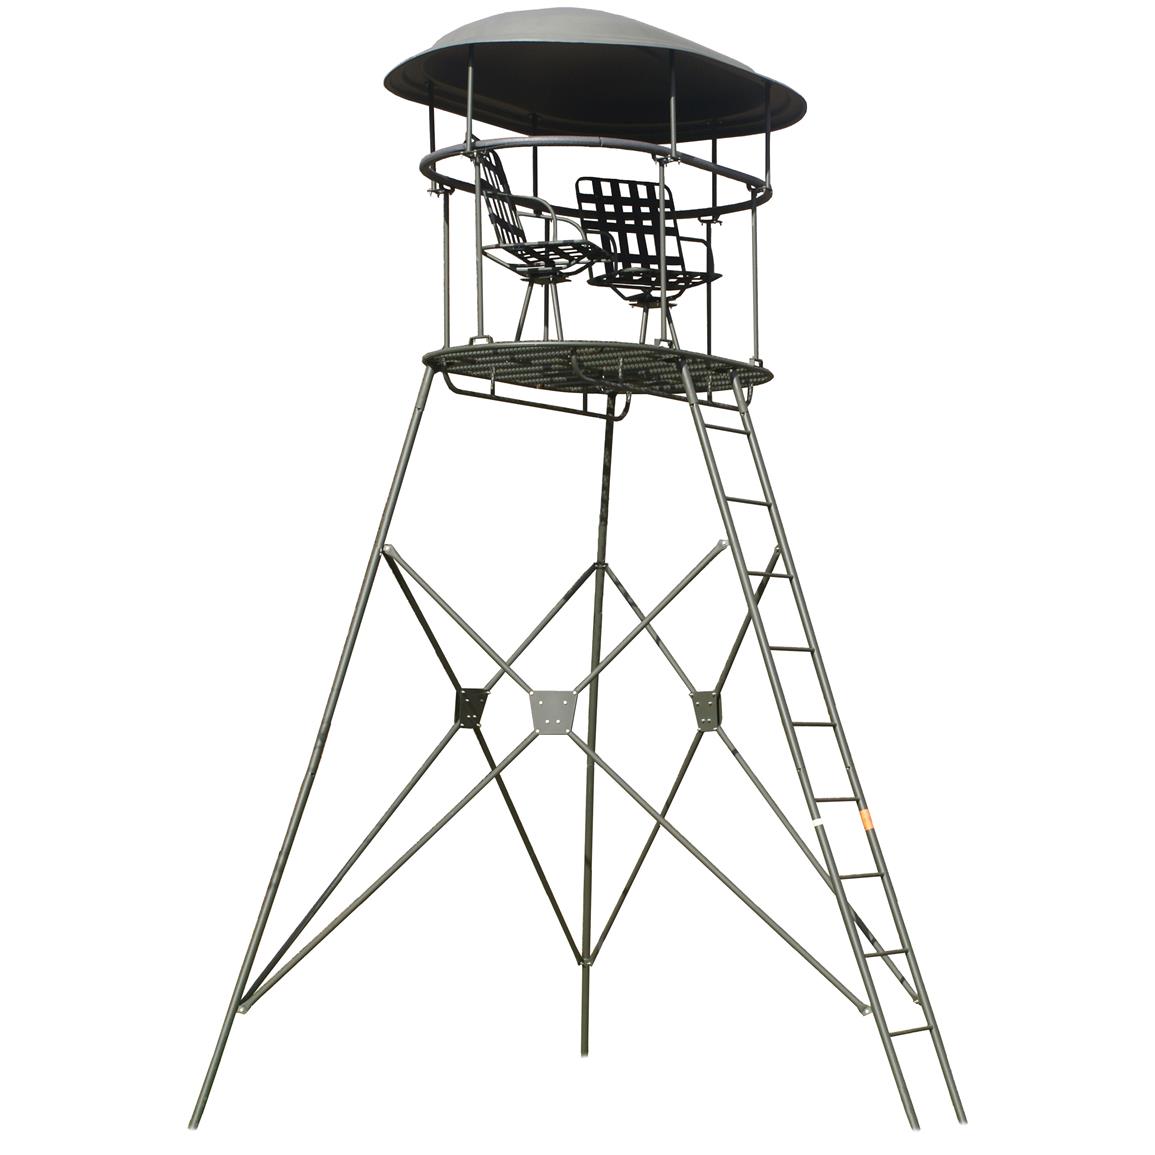 Family Tradition Double Tripod Stand 